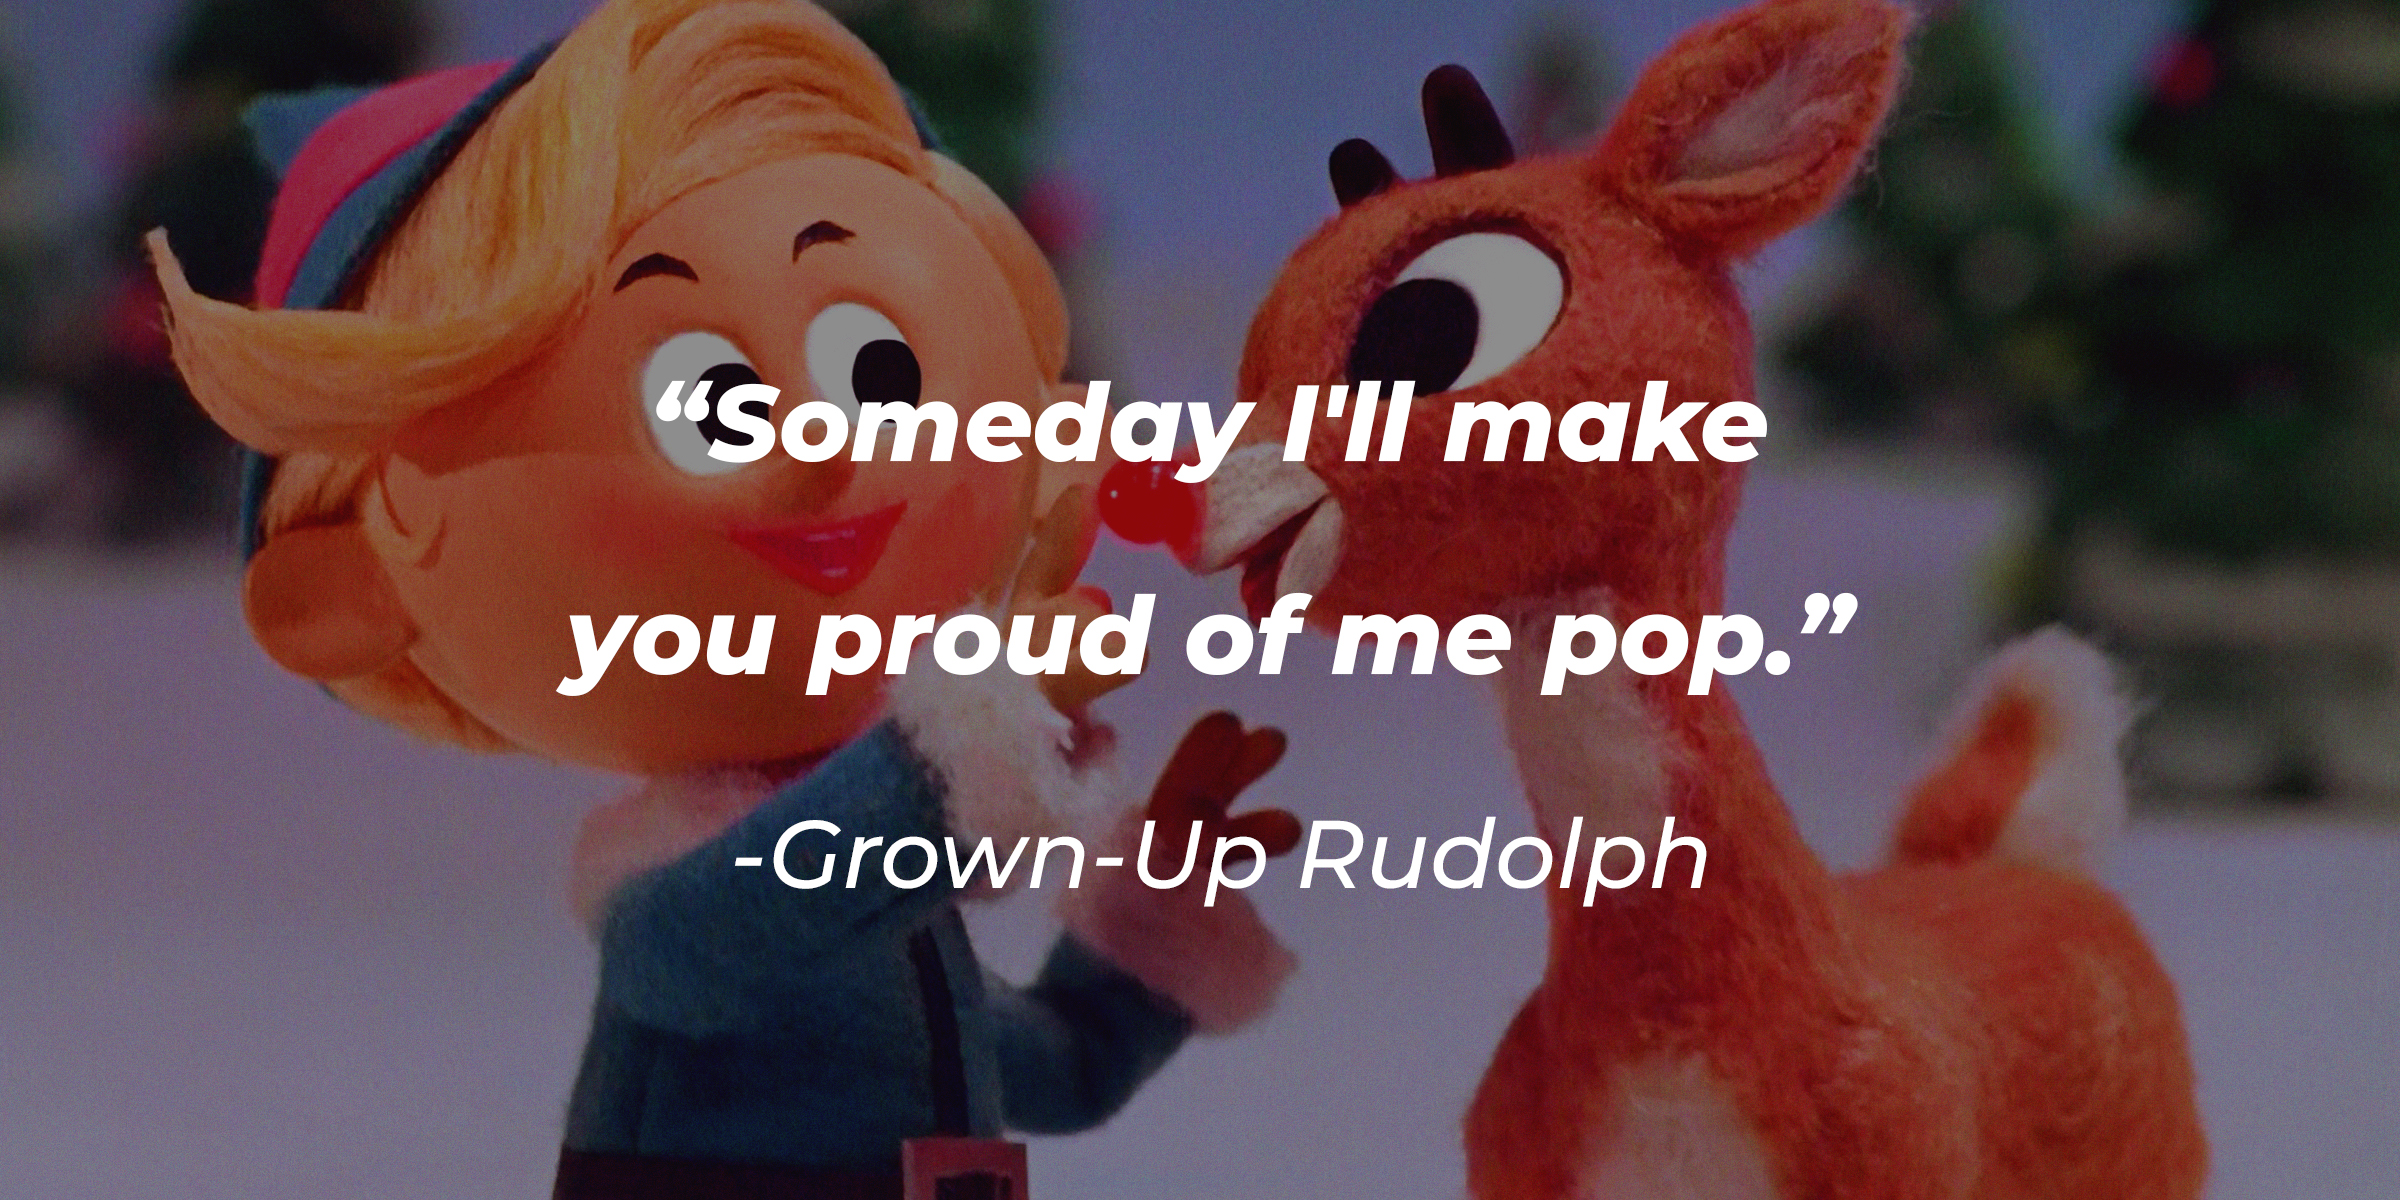 A photo of Rudolph and Hermey with Grown-Up Rudolph's quote: “Someday I'll make you proud of me, Pop.” | Source: facebook.com/Rudolph the Red-Nosed Reindeer